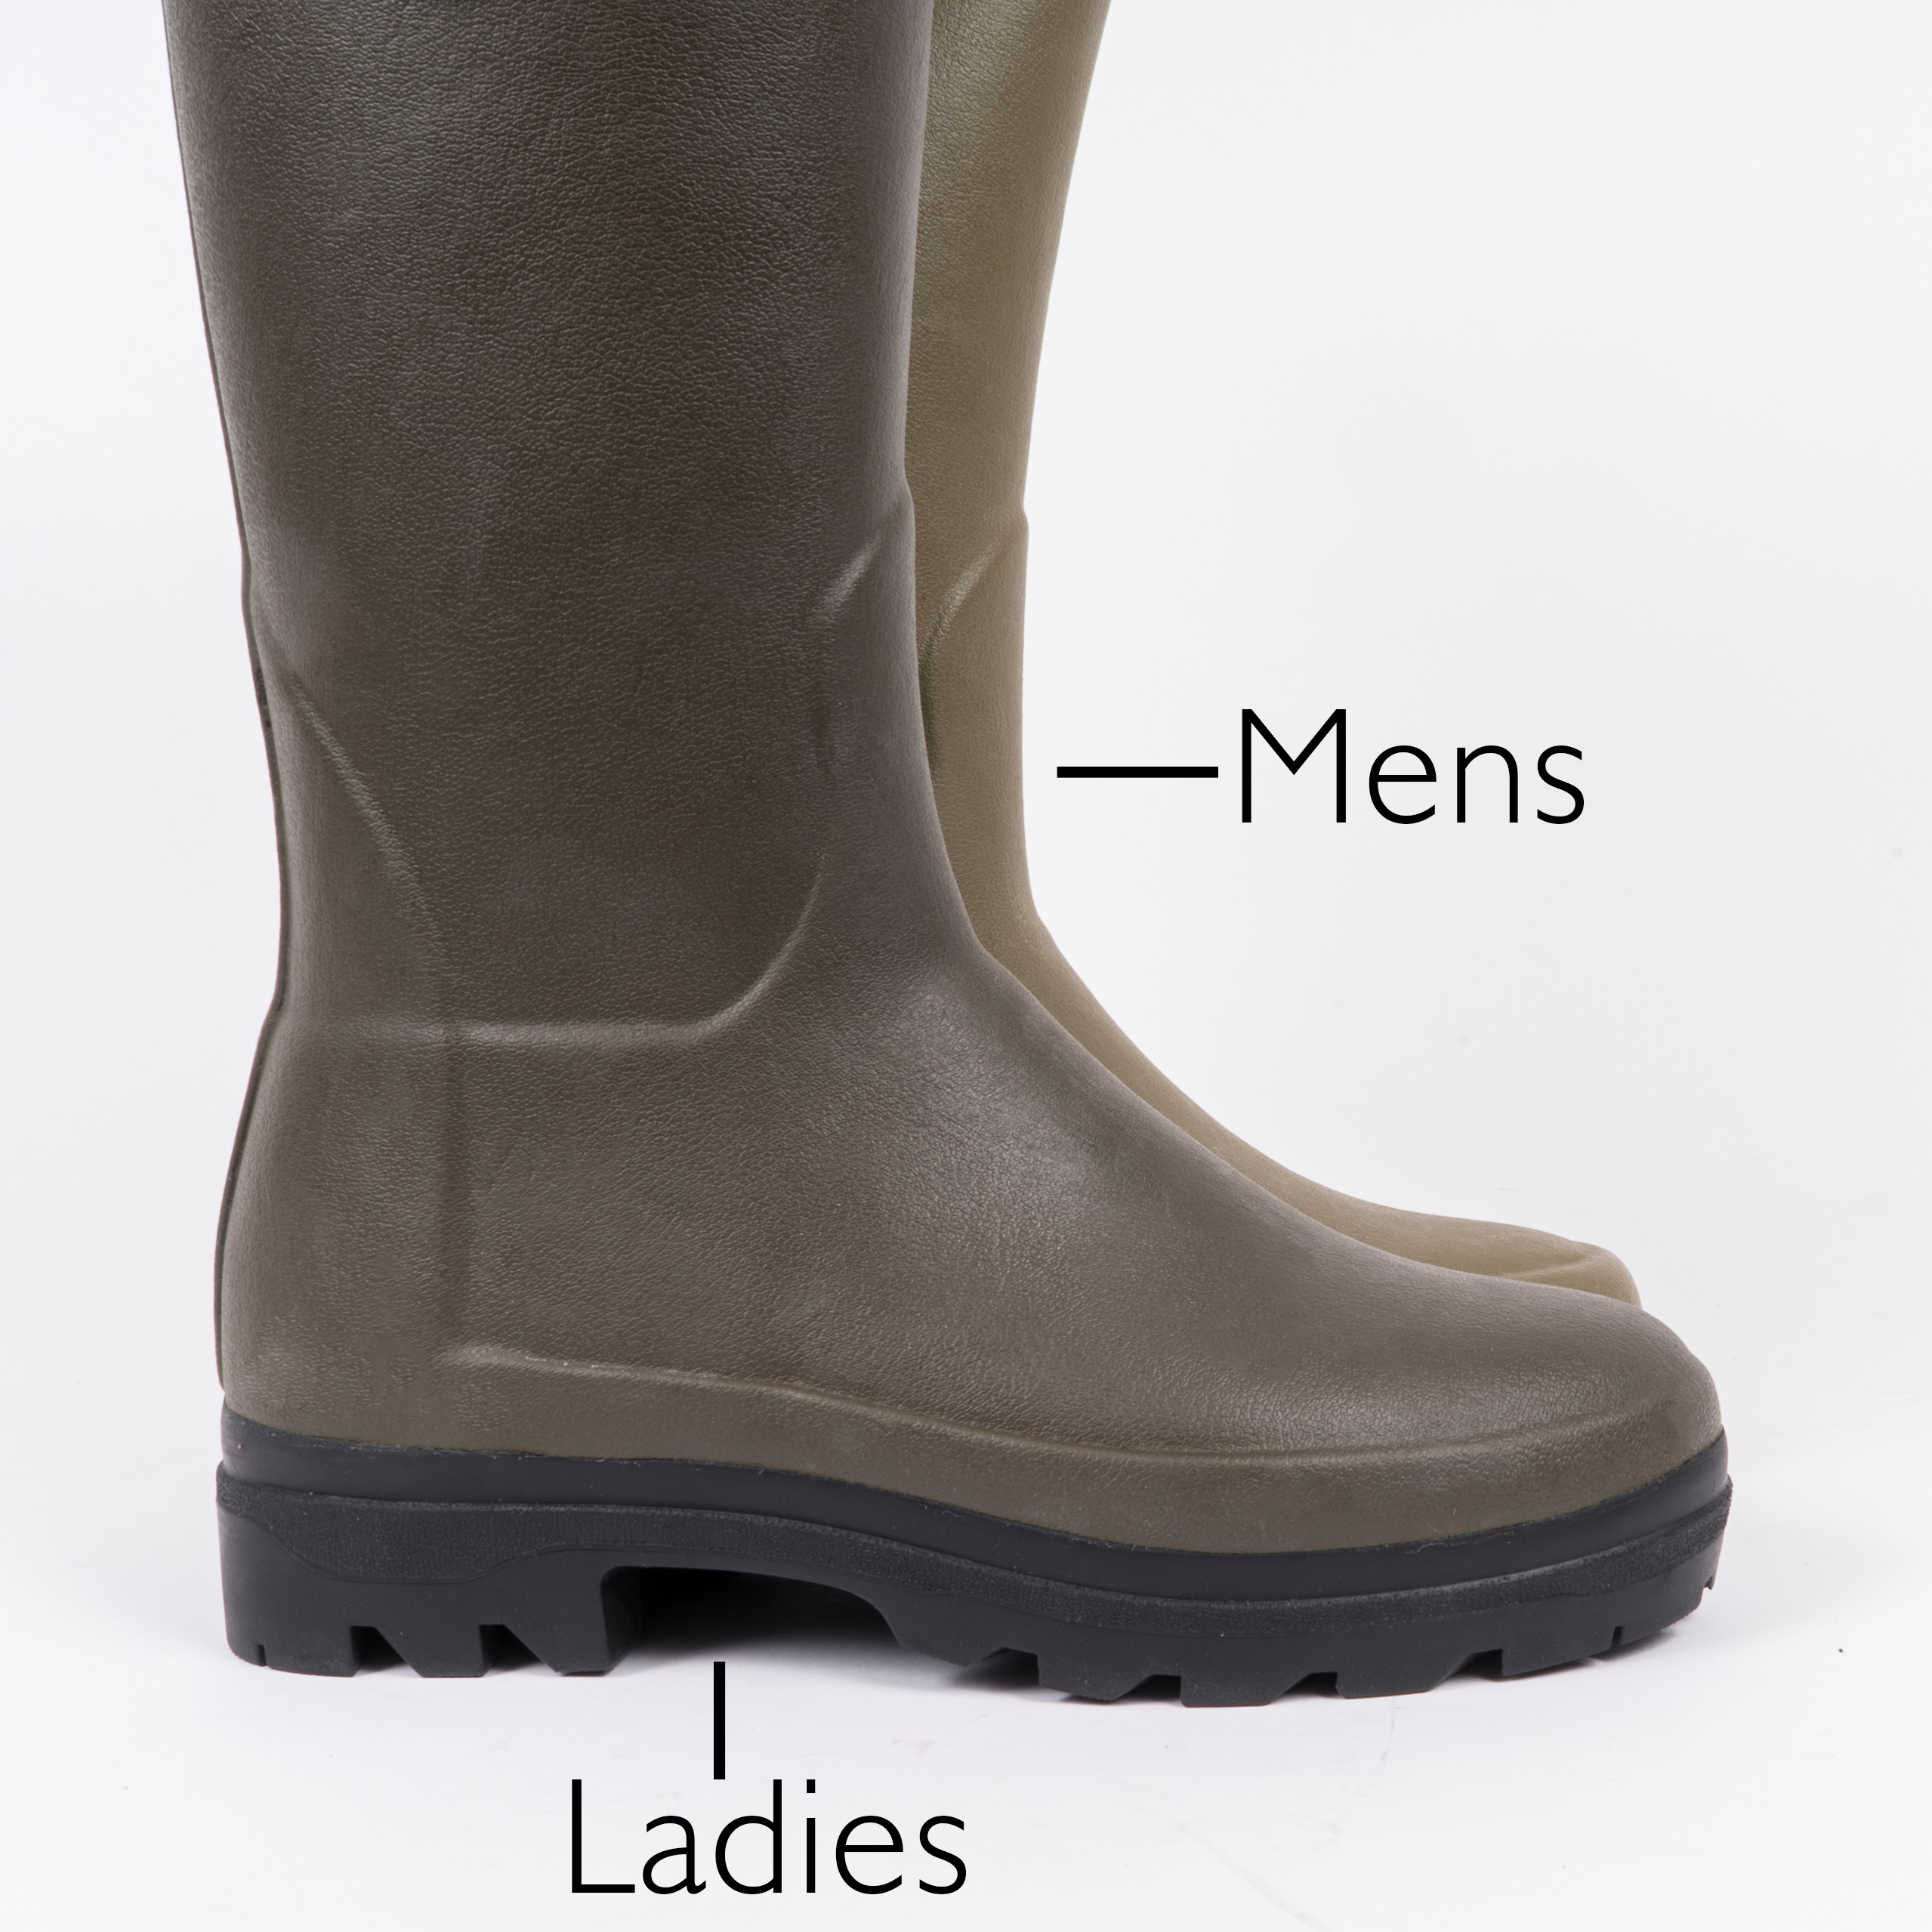 Mens and Womens Boot Size Comparisons